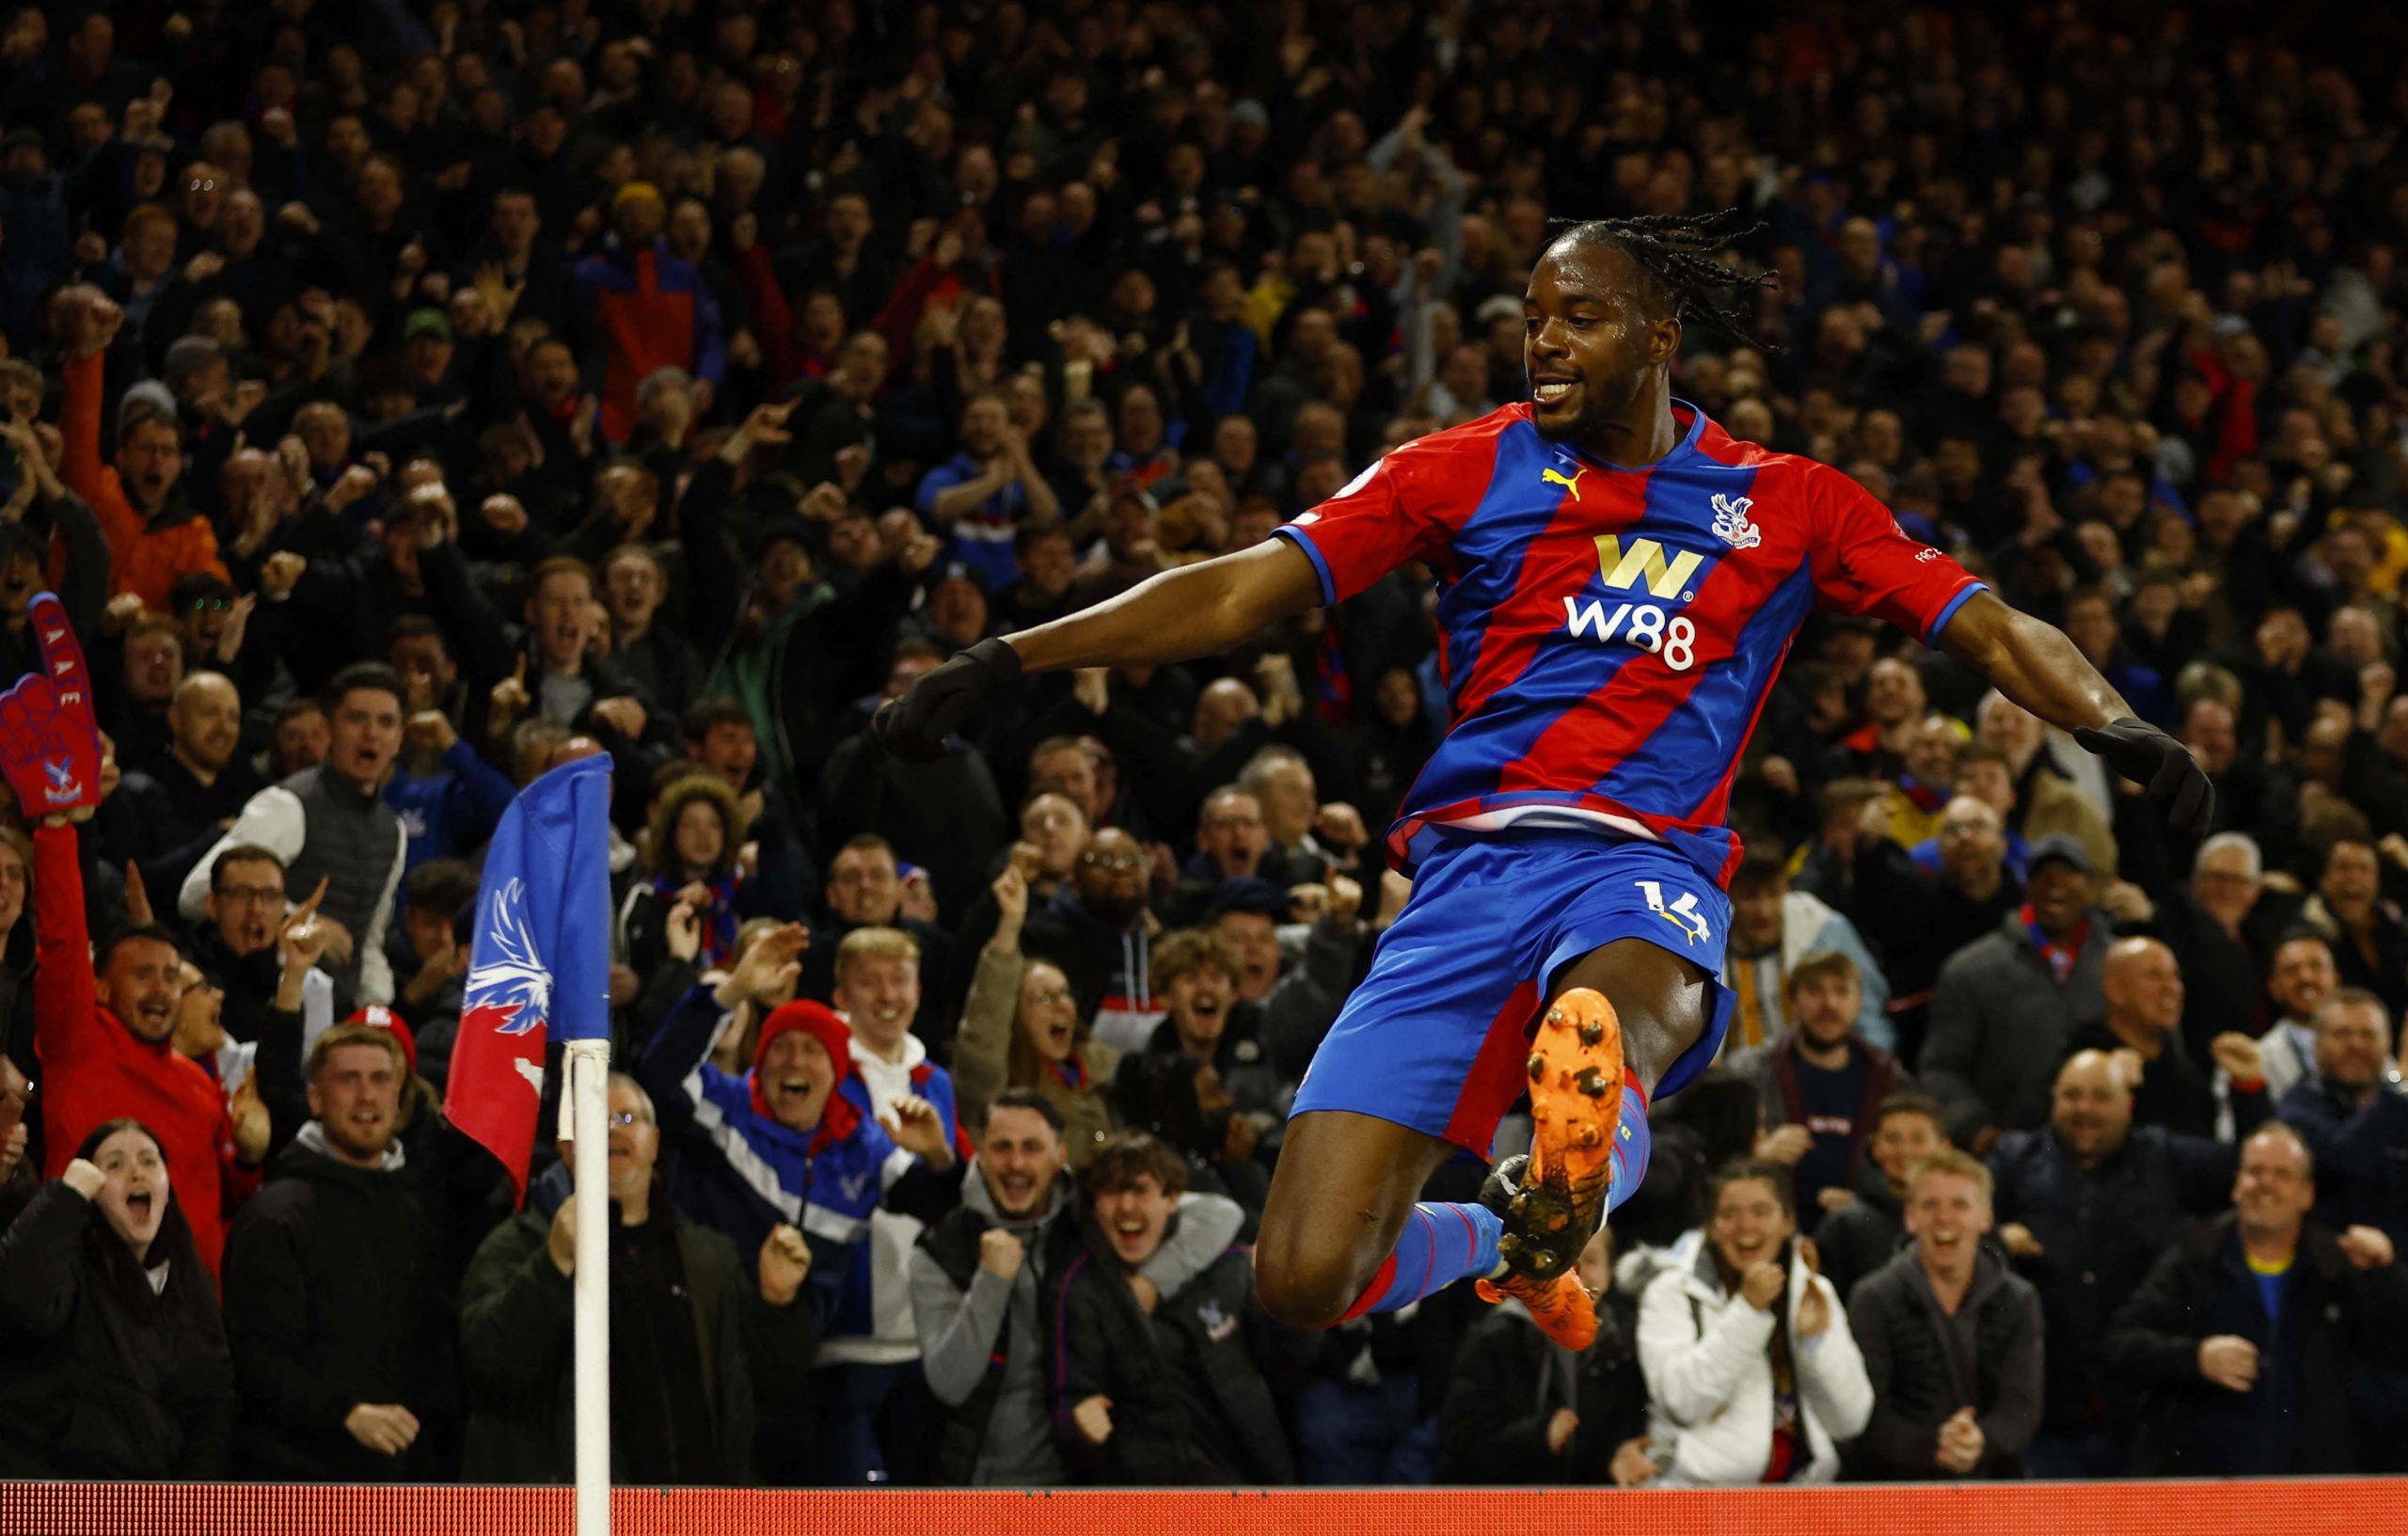 Crystal Palace's Jean-Philippe Mateta celebrates scoring their first goalSoccer Football - Premier League - Crystal Palace v Arsenal - Selhurst Park, London, Britain - April 4, 2022 Crystal Palace's Jean-Philippe Mateta celebrates scoring their first goal Action Images via Reuters/Andrew Boyers EDITORIAL USE ONLY. No use with unauthorized audio, video, data, fixture lists, club/league logos or 'live' services. Online in-match use limited to 75 images, no video emulation. No use in betting, games